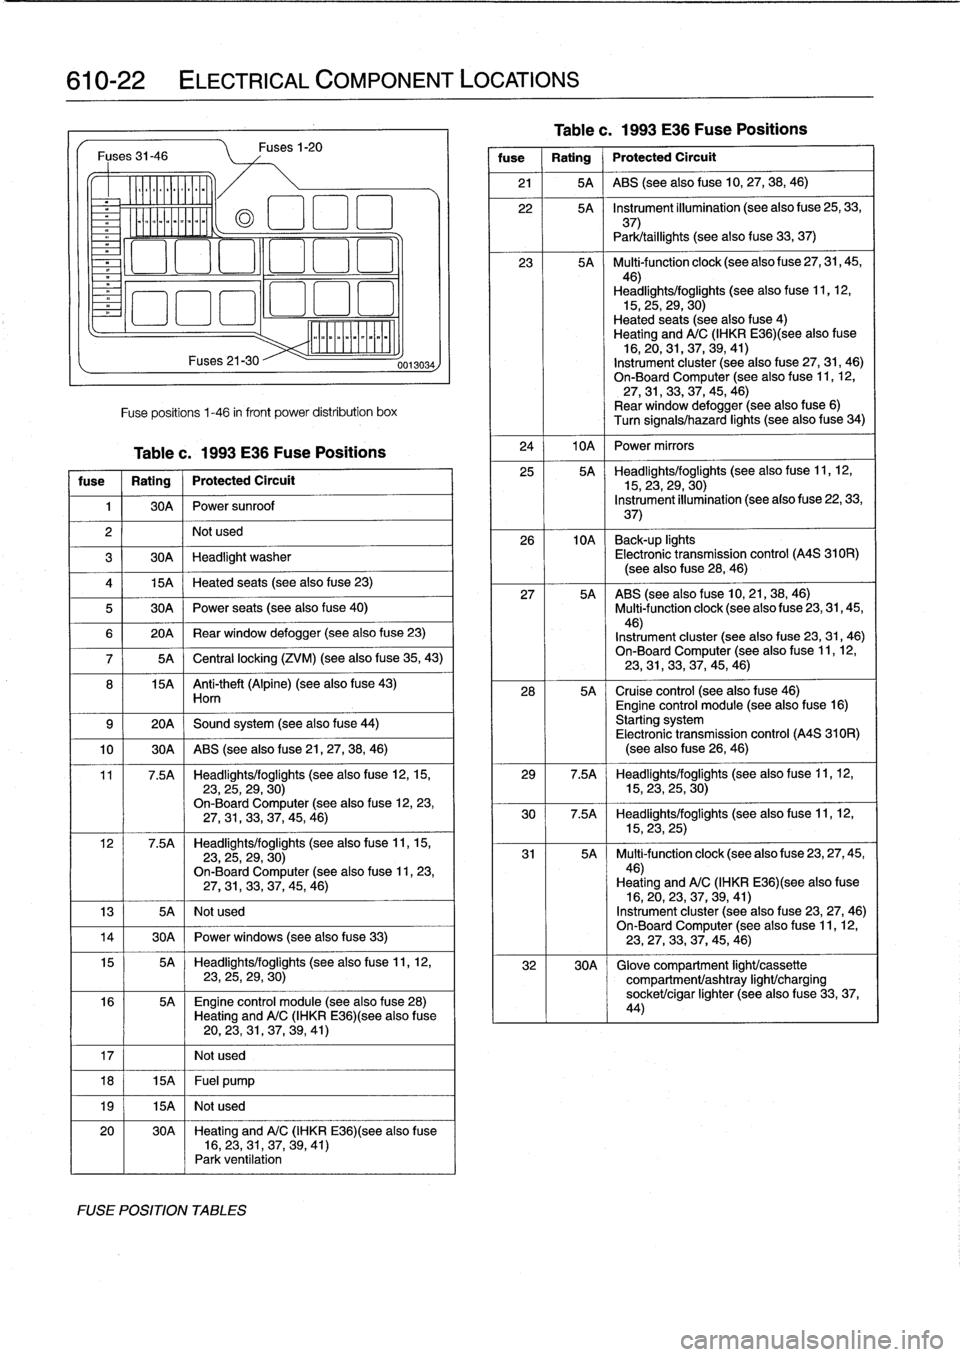 BMW 318i 1995 E36 Workshop Manual 
610-22

	

ELECTRICAL
COMPONENT
LOCATIONS

Fuses
31-46

Ylililll

milililil
Fuses
21-30
Fuse
positions
1-46
in
front
Power
distribution
box

Table
c
.
1993
E36
Fuse
Positions

fuse

	

1
Rating

	

j